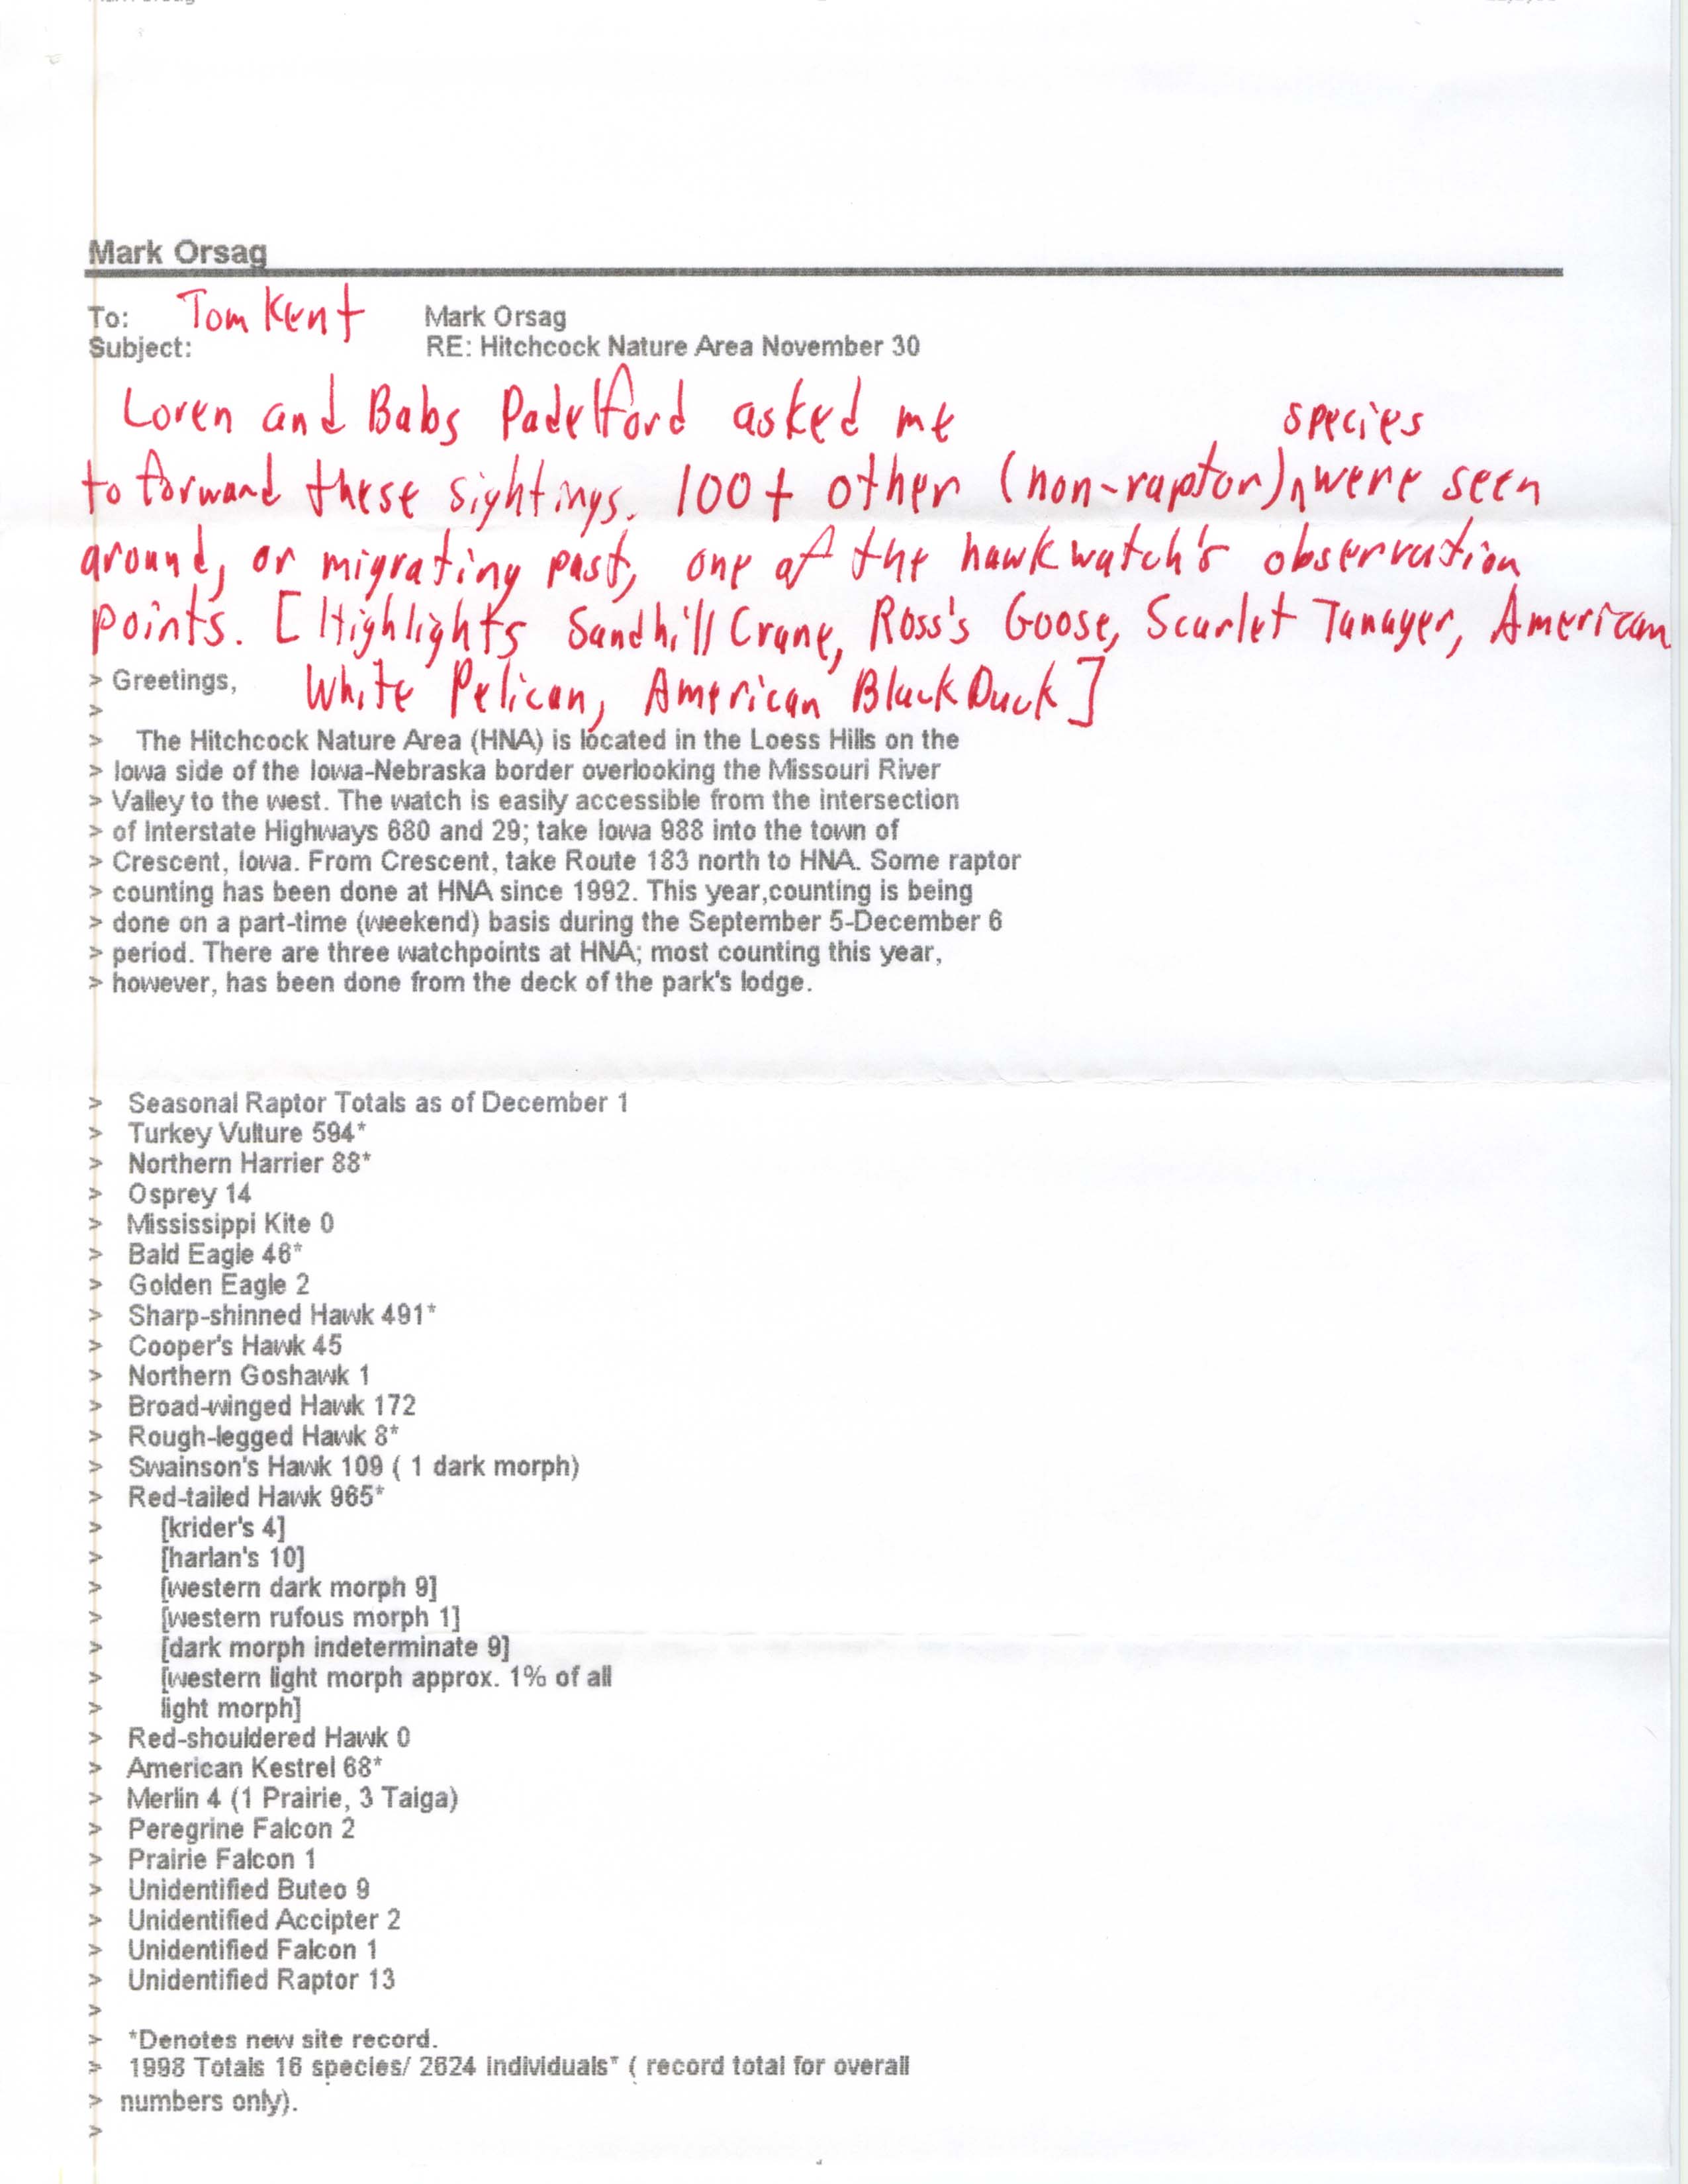 Mark Orsag forwarded email to Thomas H. Kent regarding a Hawk watch at Hitchcock Nature Area, fall 1998